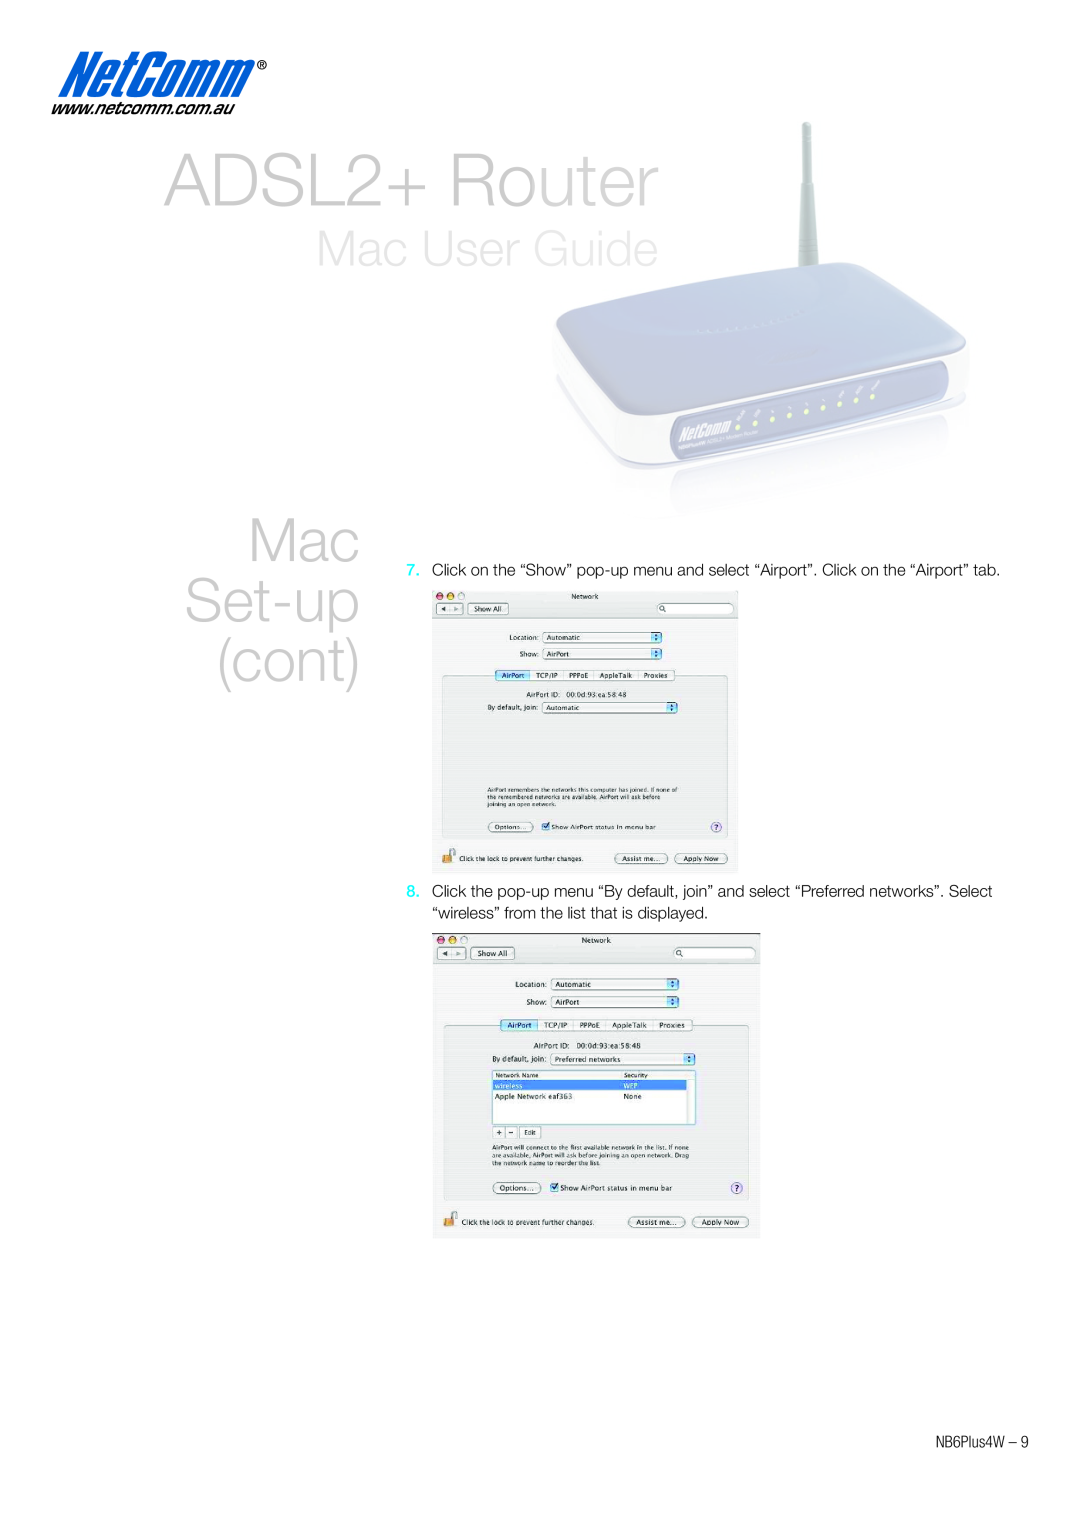 NetComm NB6PLUS4W quick start cont, ADSL2+ Router, Mac User Guide 